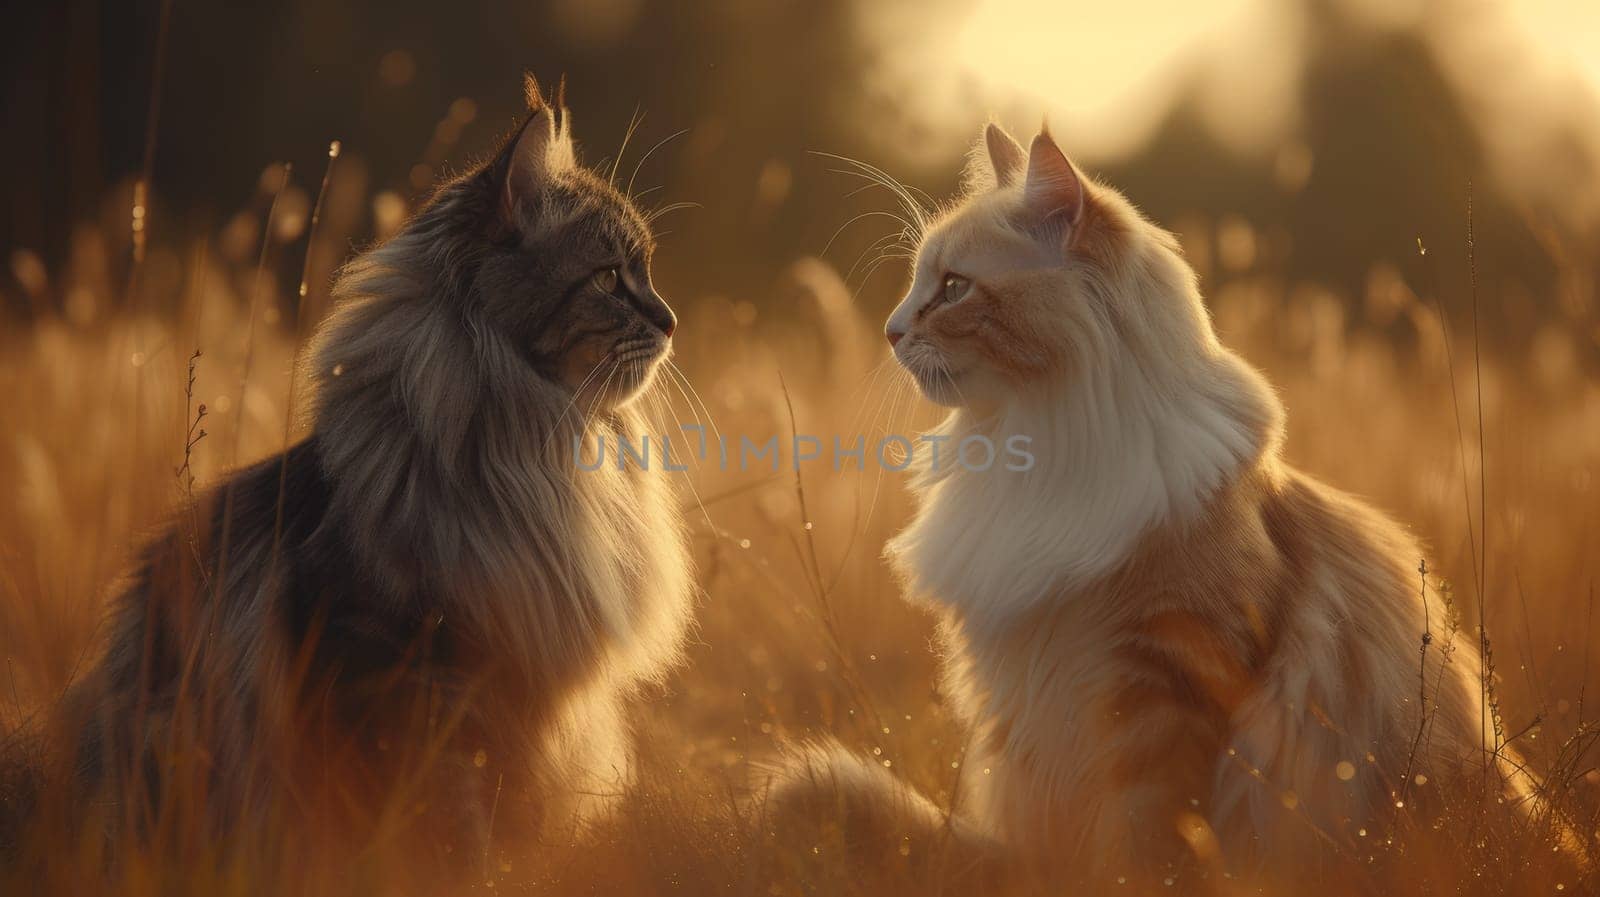 Two cats sitting in a field looking at each other